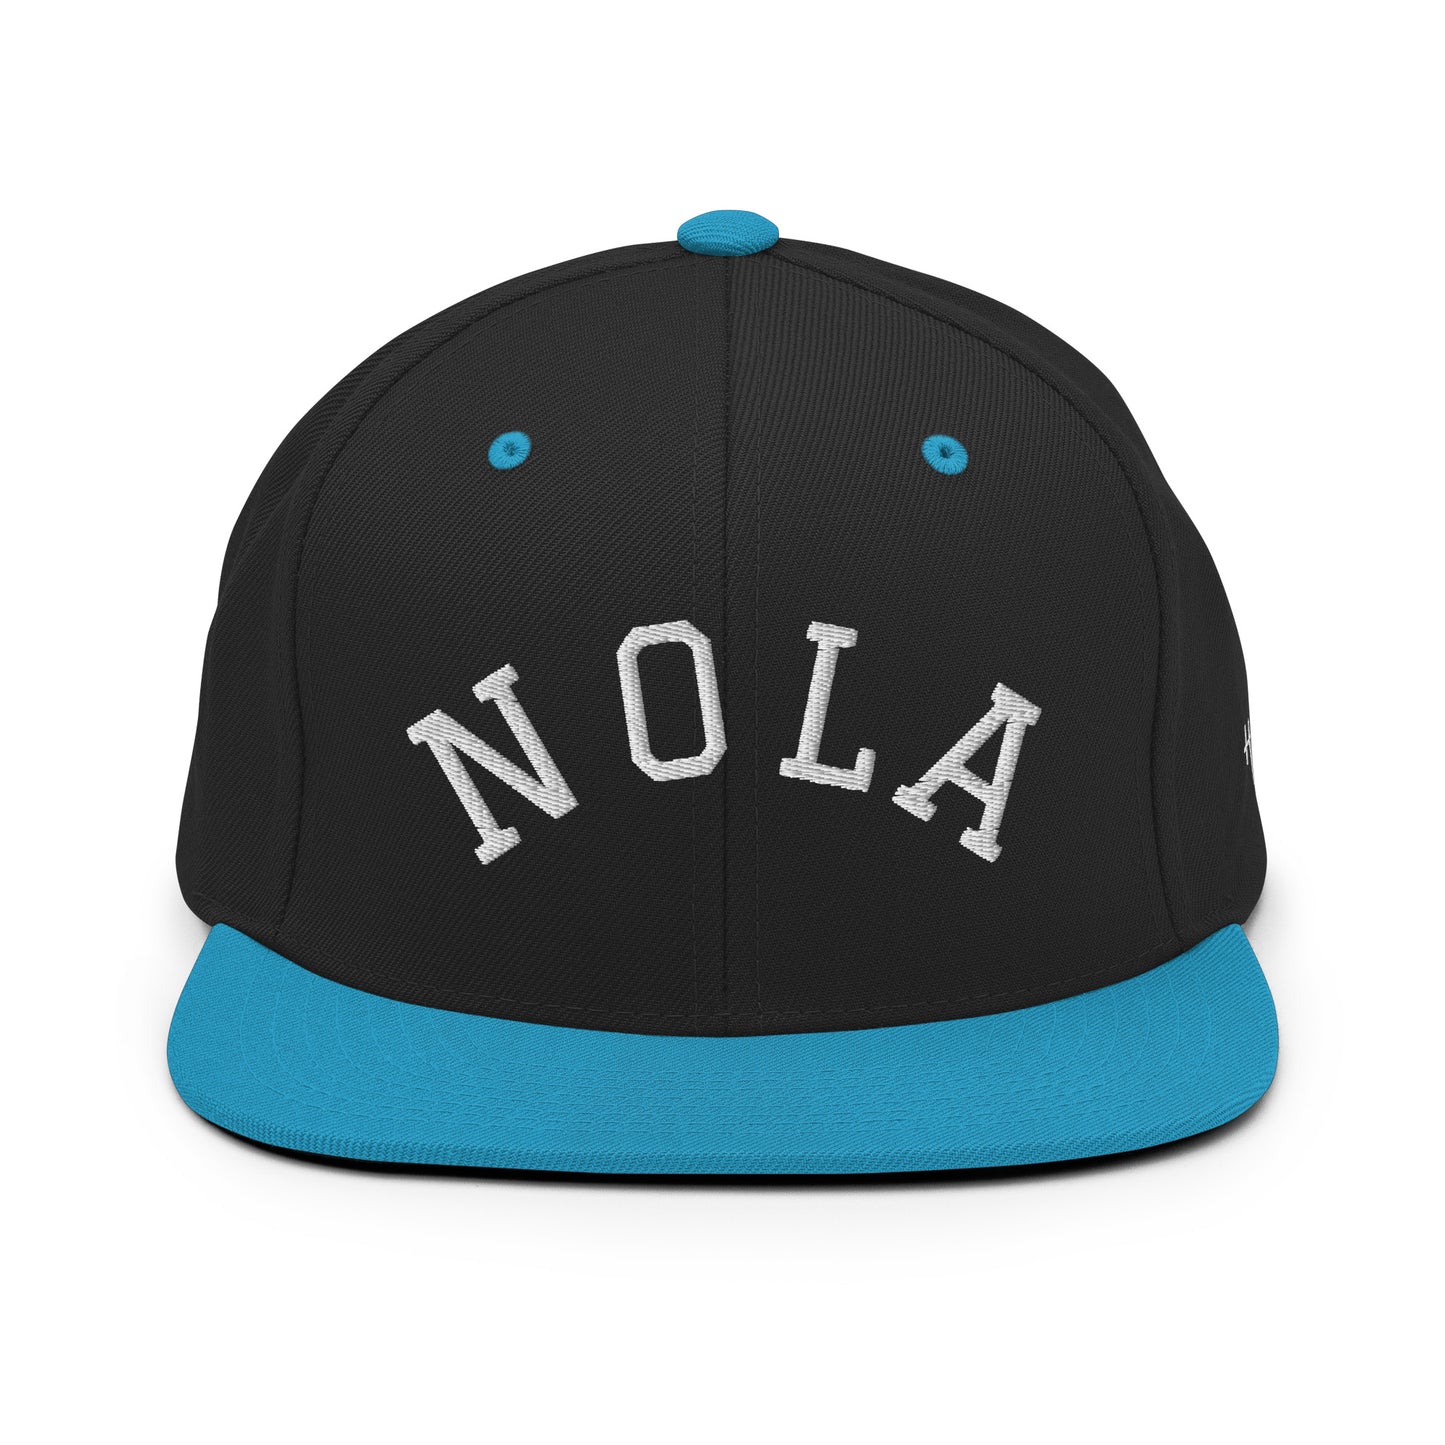 New Orleans Arch 6 Panel Snapback Hat